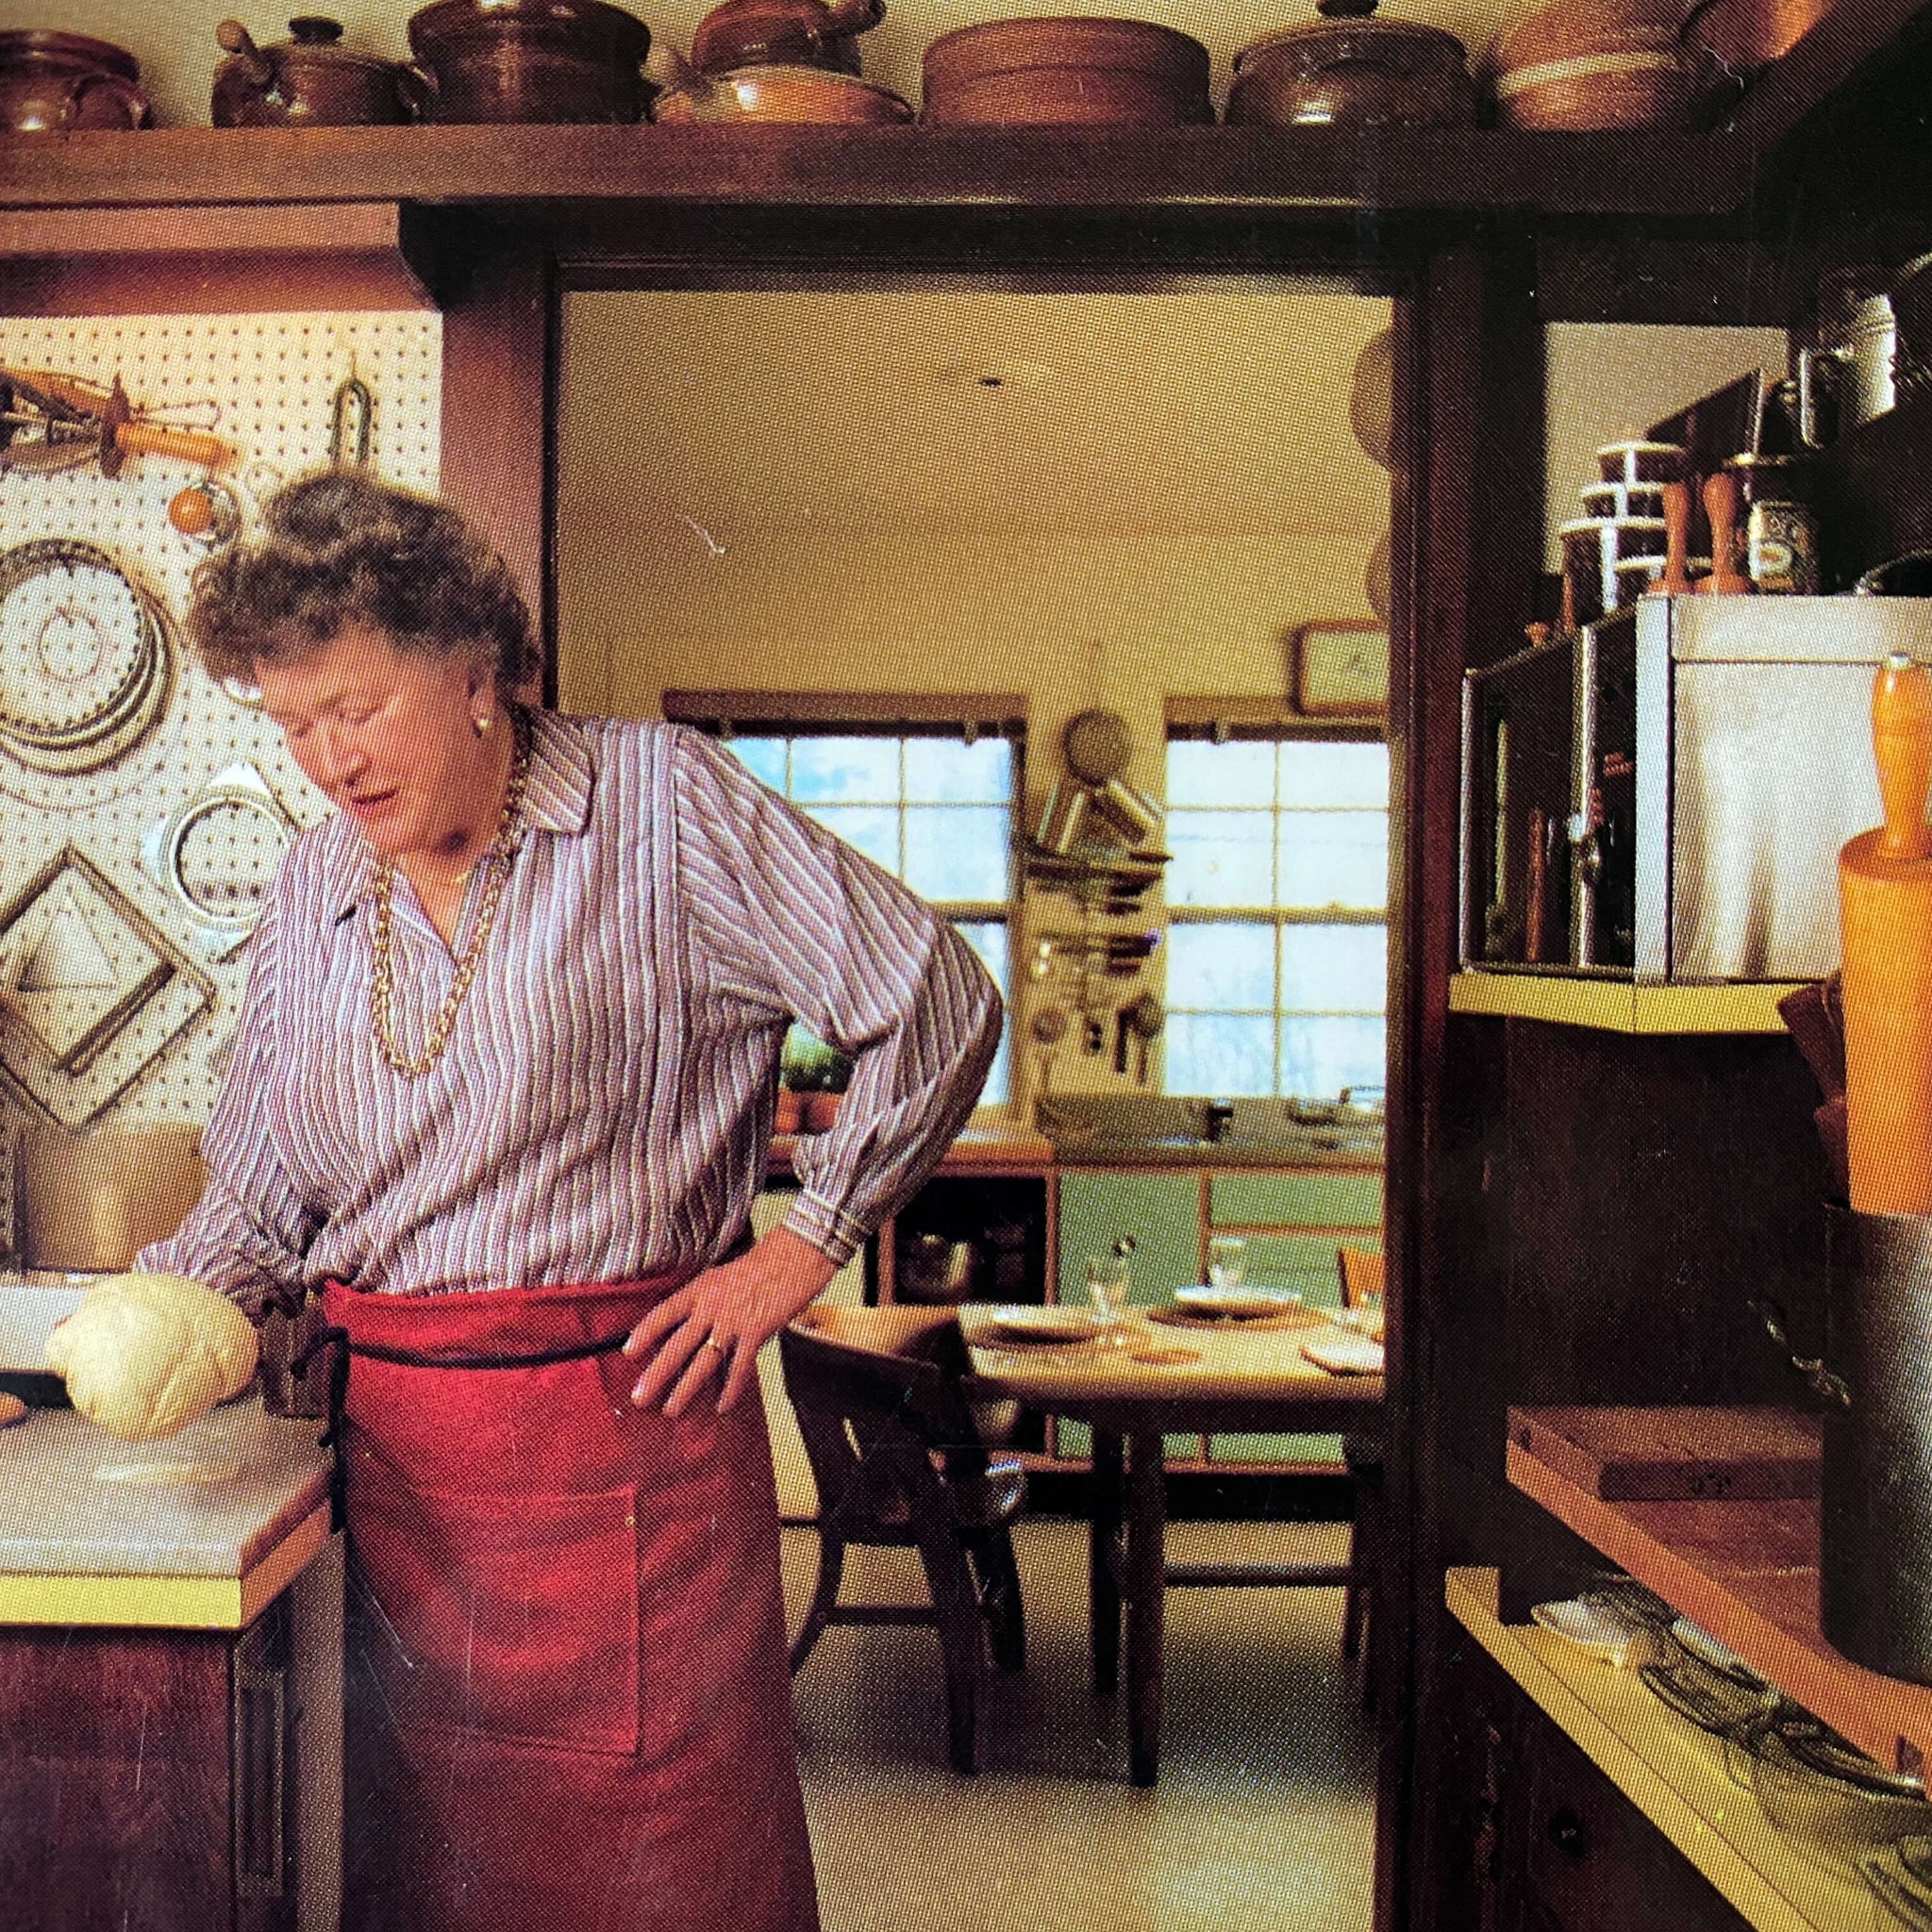 The Way To Cook- Julia Child- 1989 Edition - Oversized Cookbook